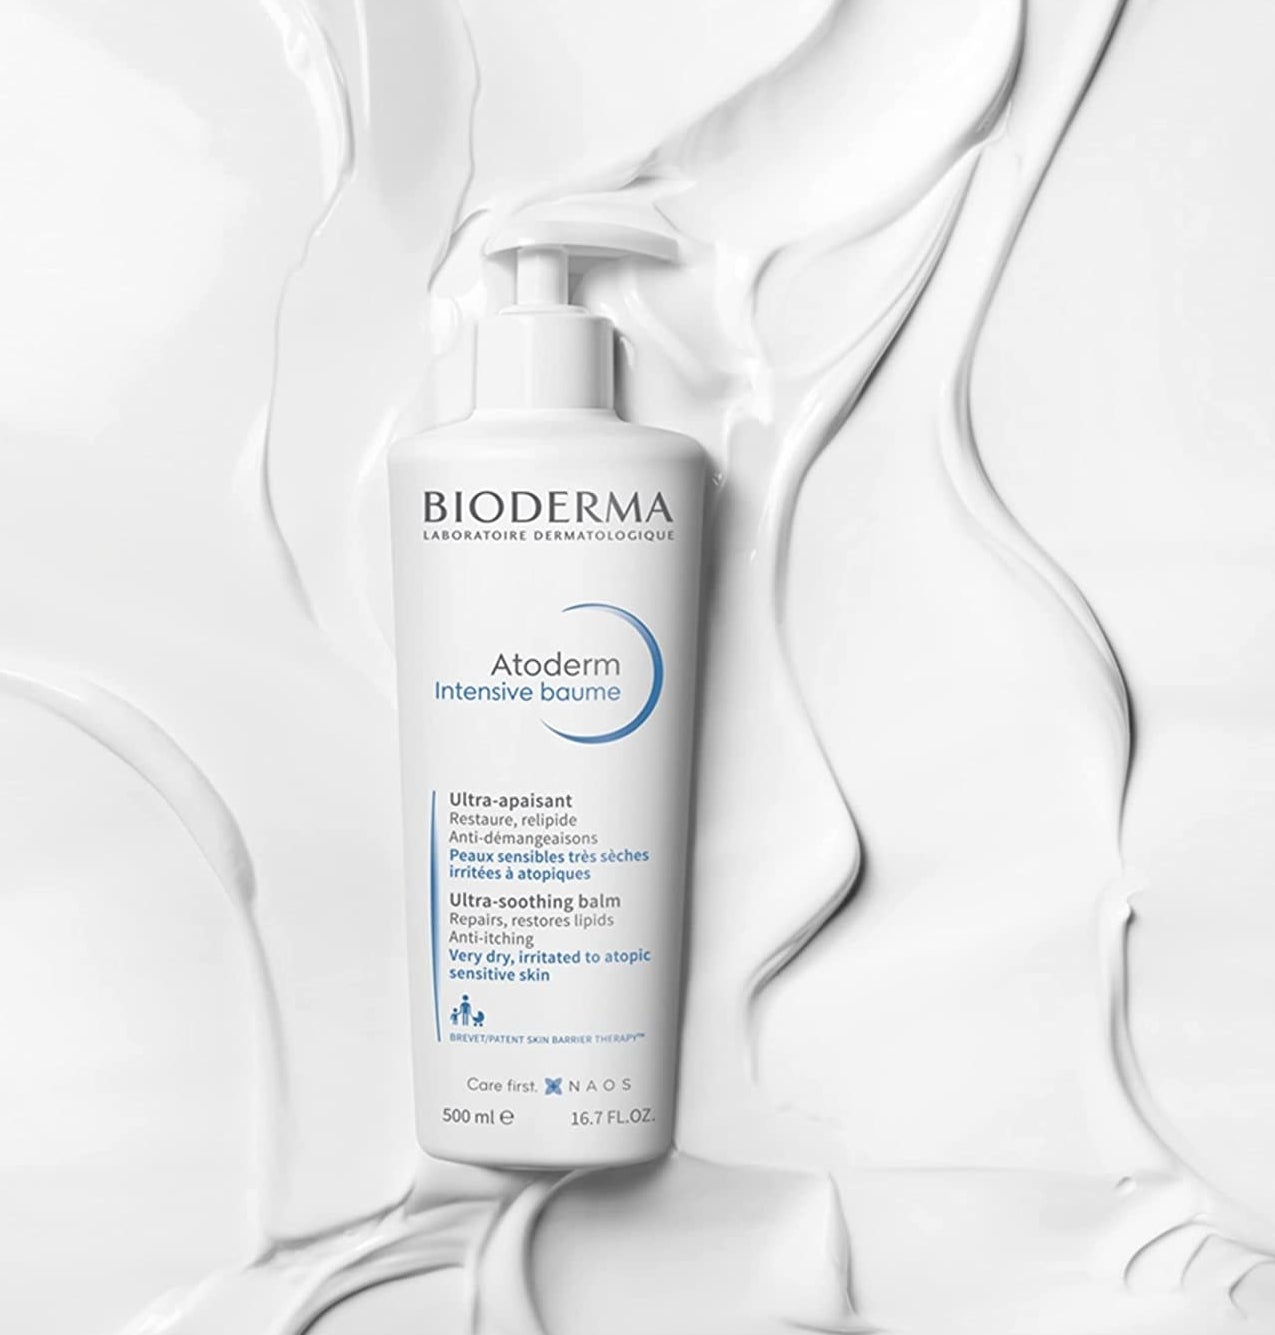 a bottle of the bioderma soothing body lotion on a simple background